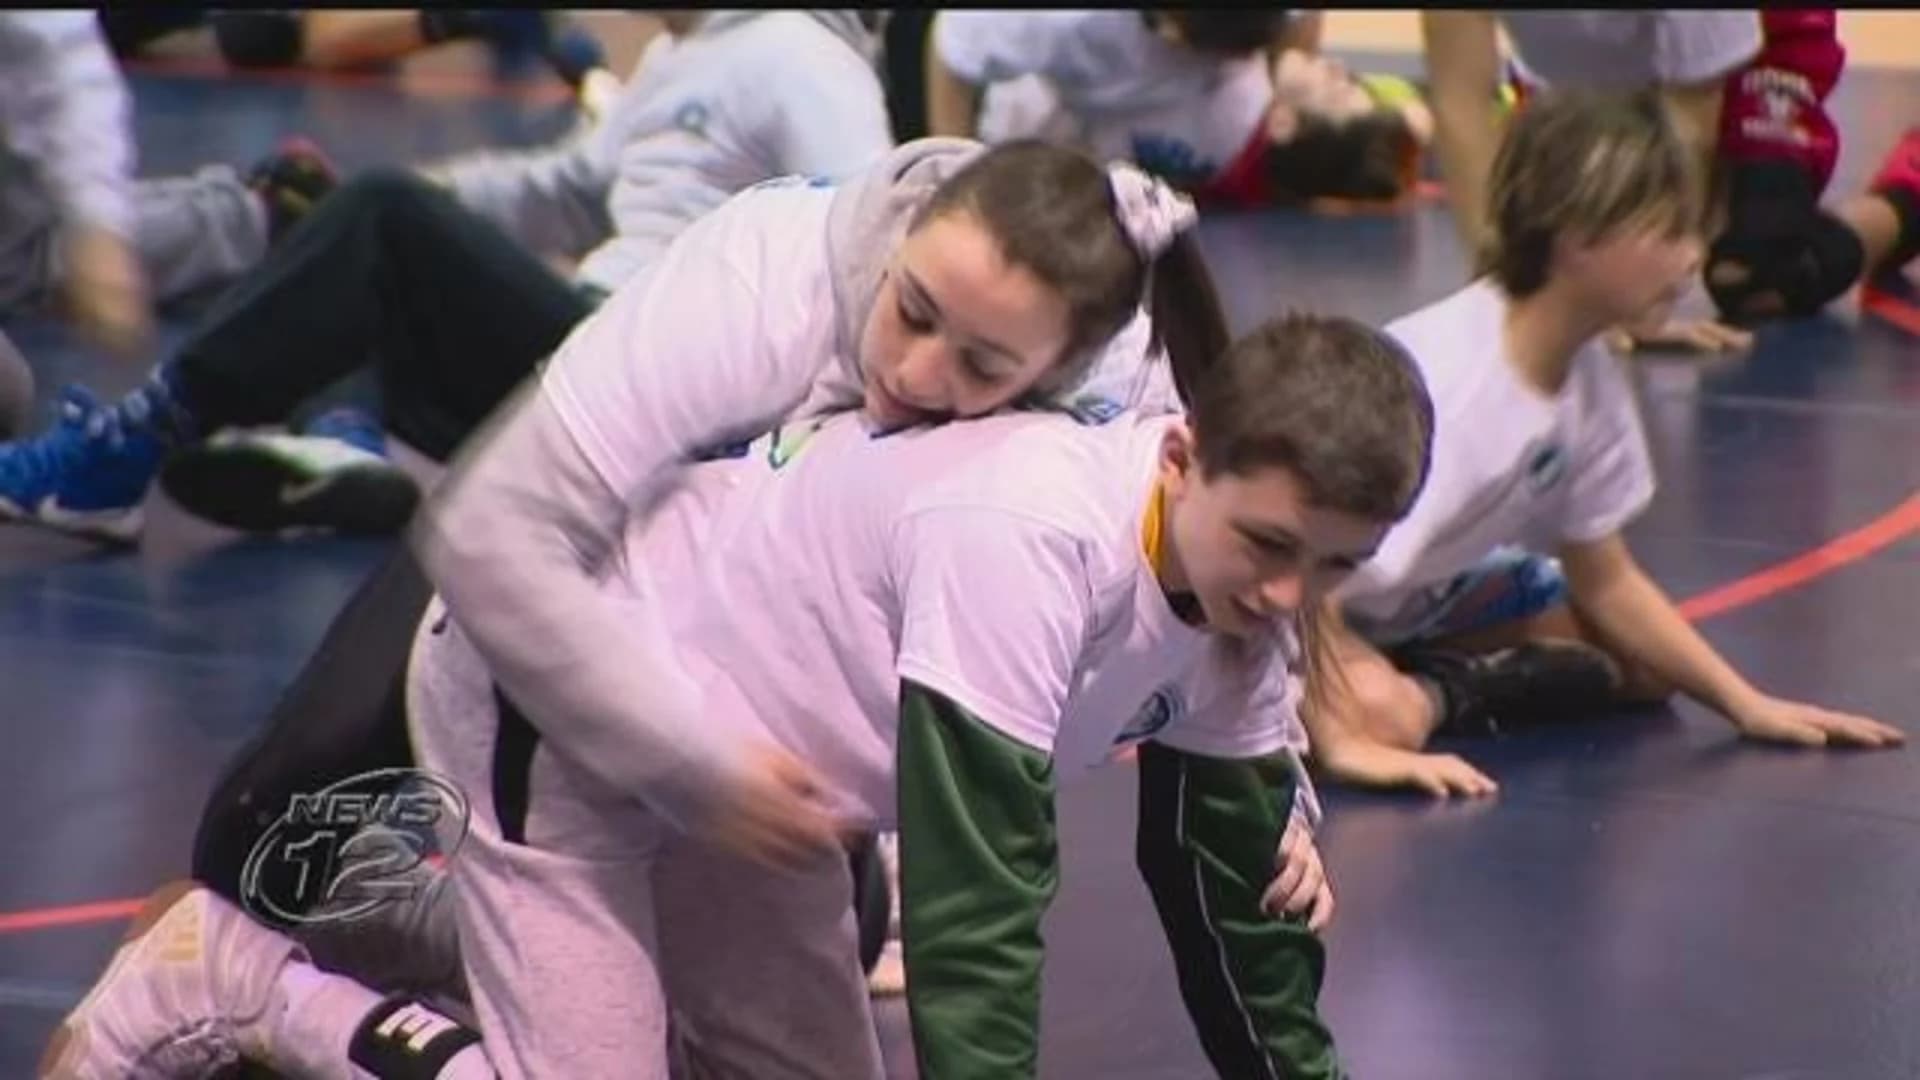 Wrestlers hit the mat to take down opioid epidemic